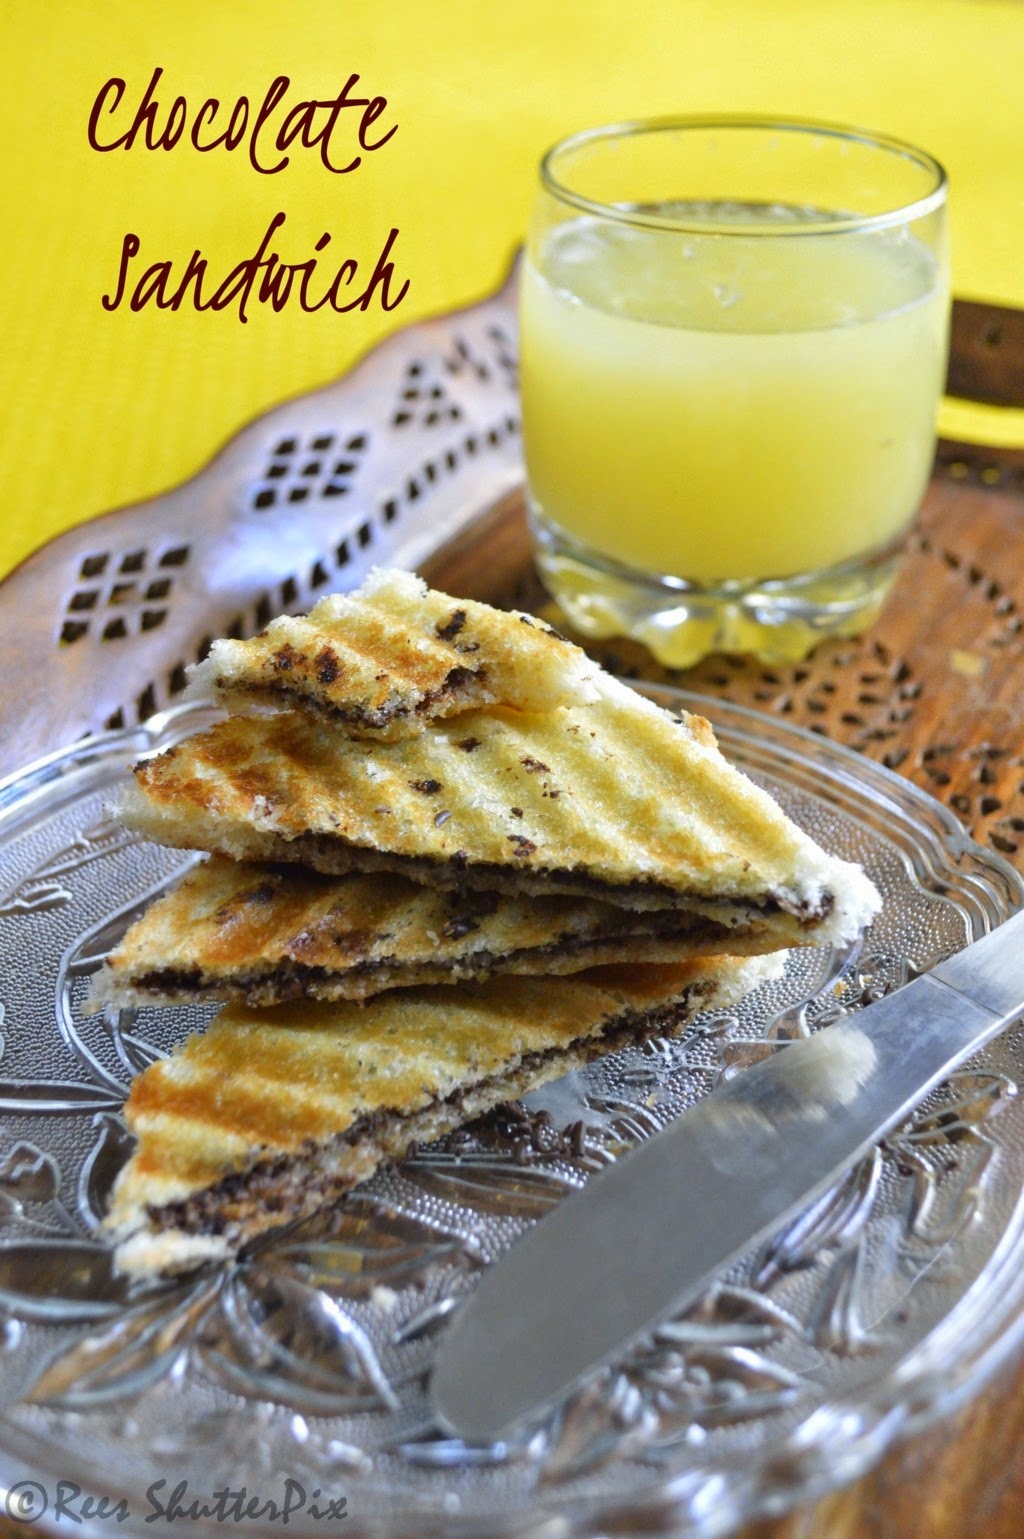 Grilled Chocolate Sandwich with Sweet Lime Juice Recipe,Brench Recipes,easy sandwich ideas, grilled sandwich recipes, chocolate sandwiches recipes, grilled chocolate sandwich recipes. kids favourite recipes, mosambi juice recipe, sathukudi juice recipe, sweet lime juice recipe